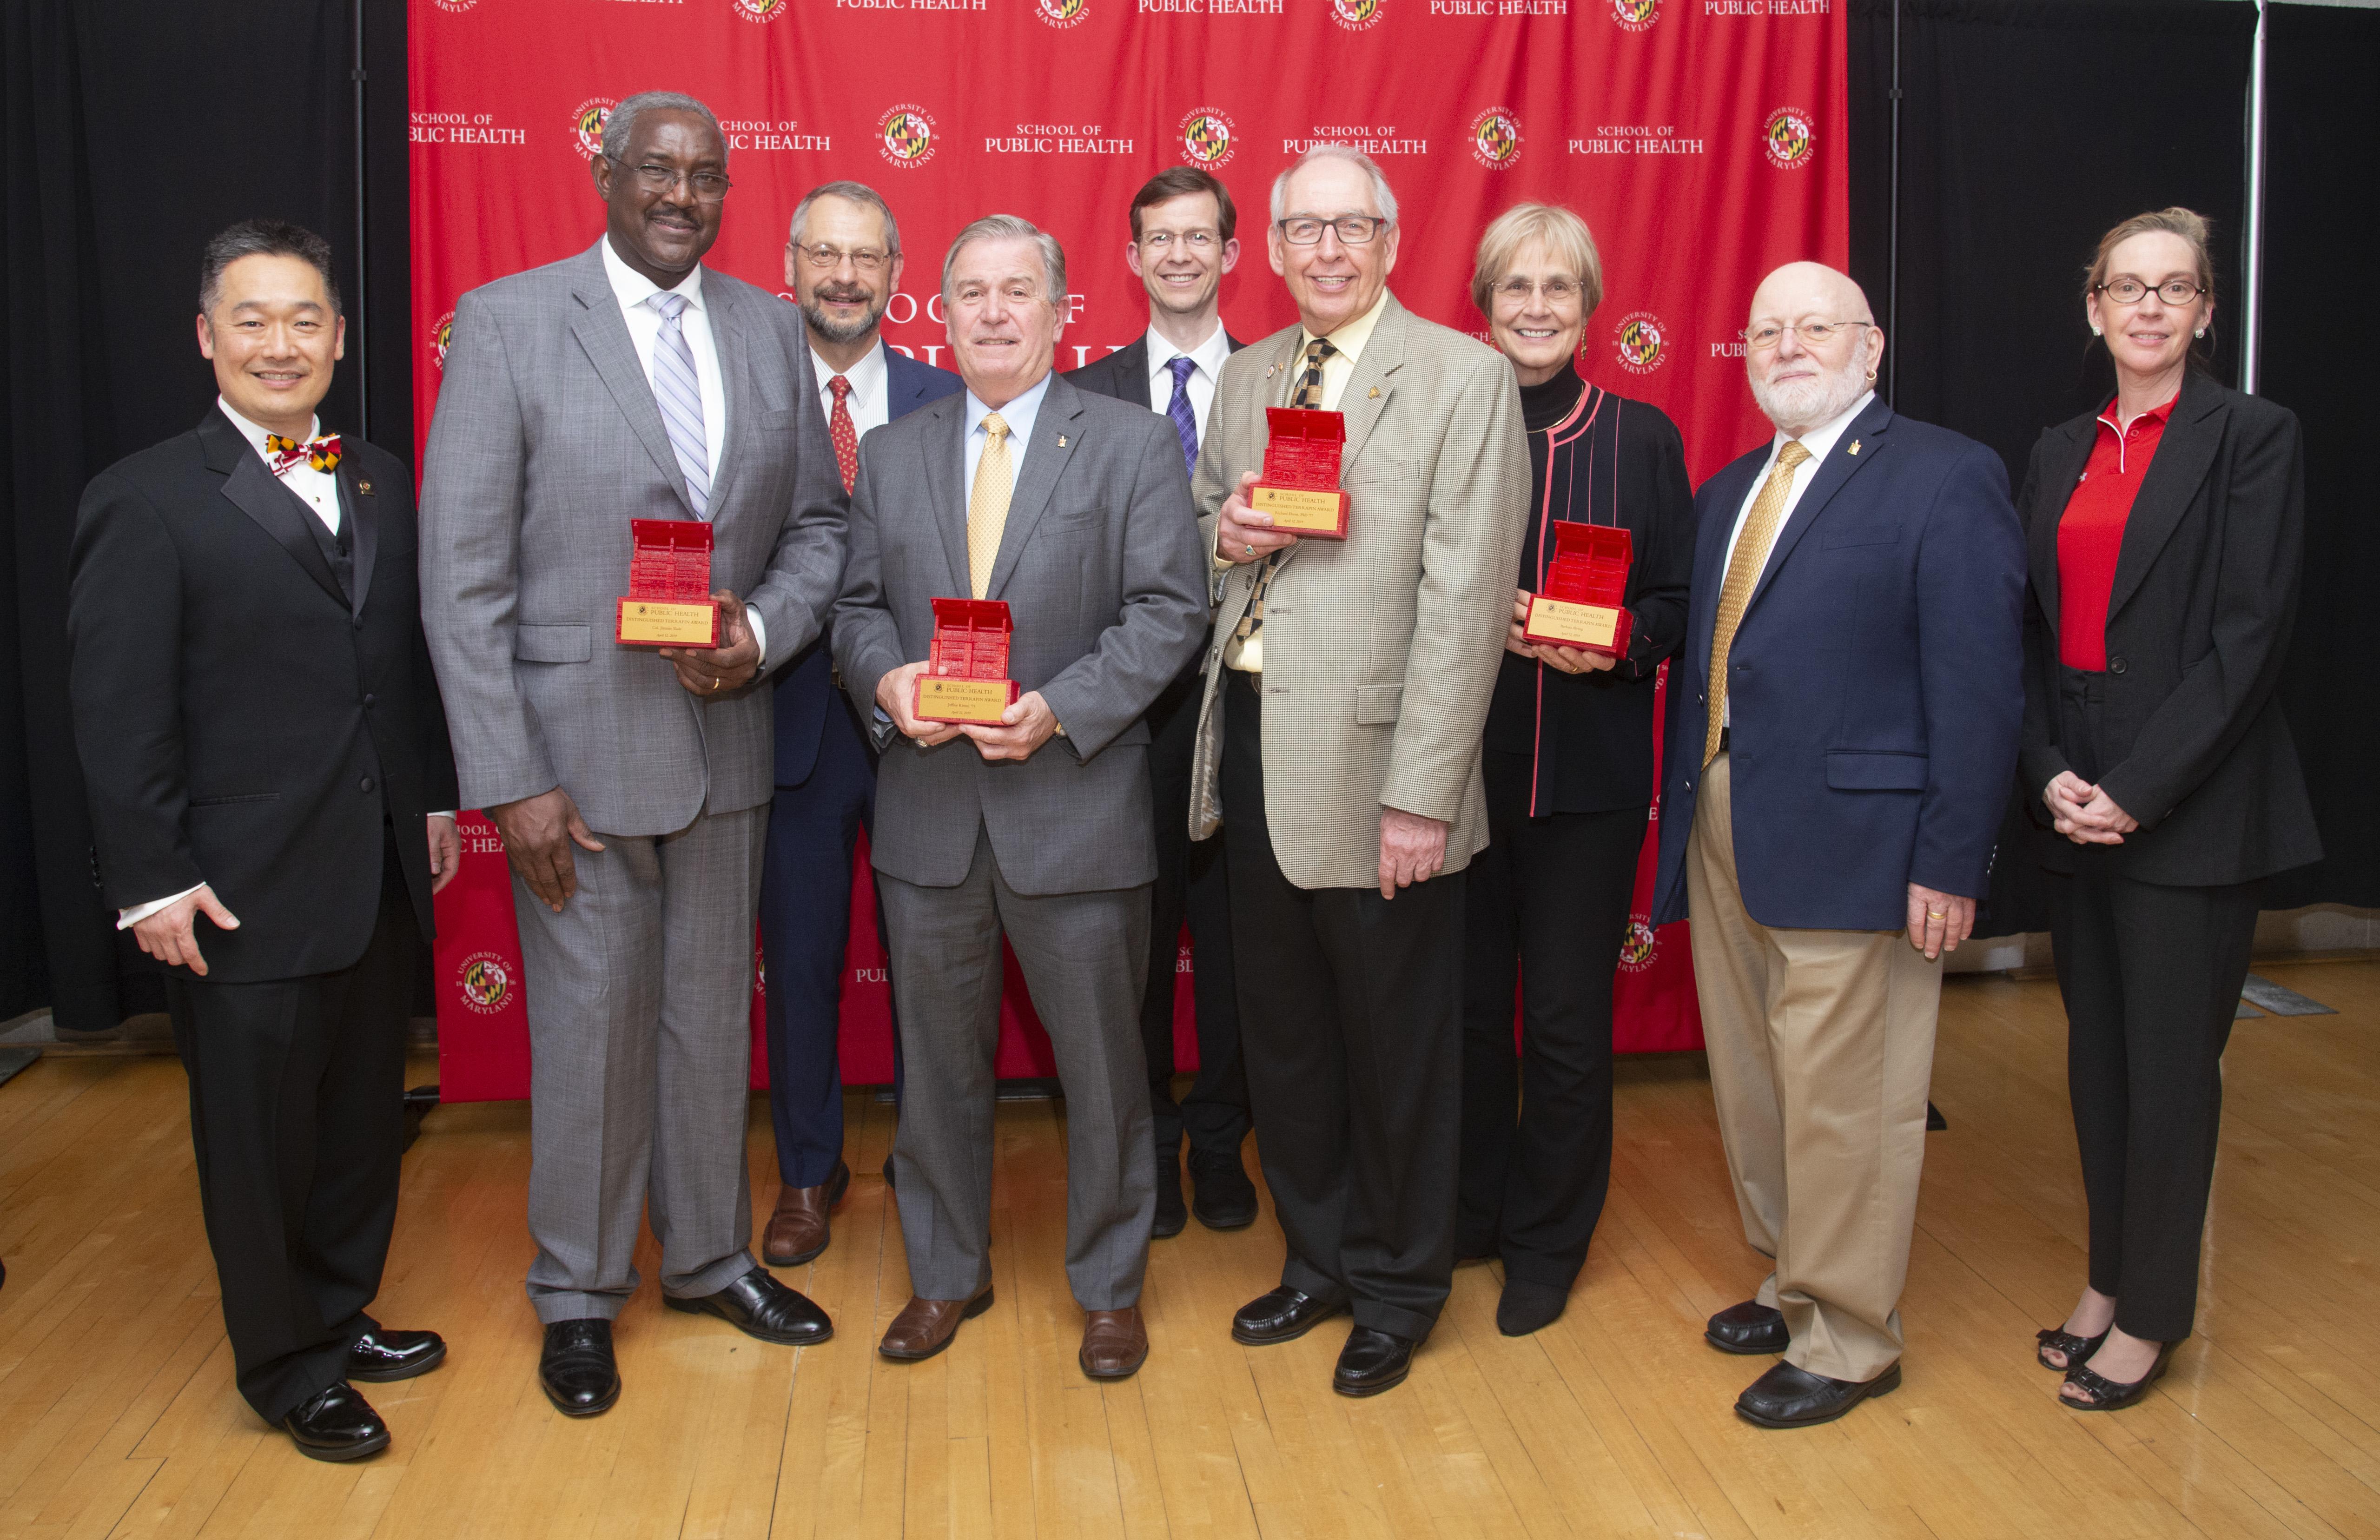 2019 Distinguished Terrapin Awardees from the University of Maryland